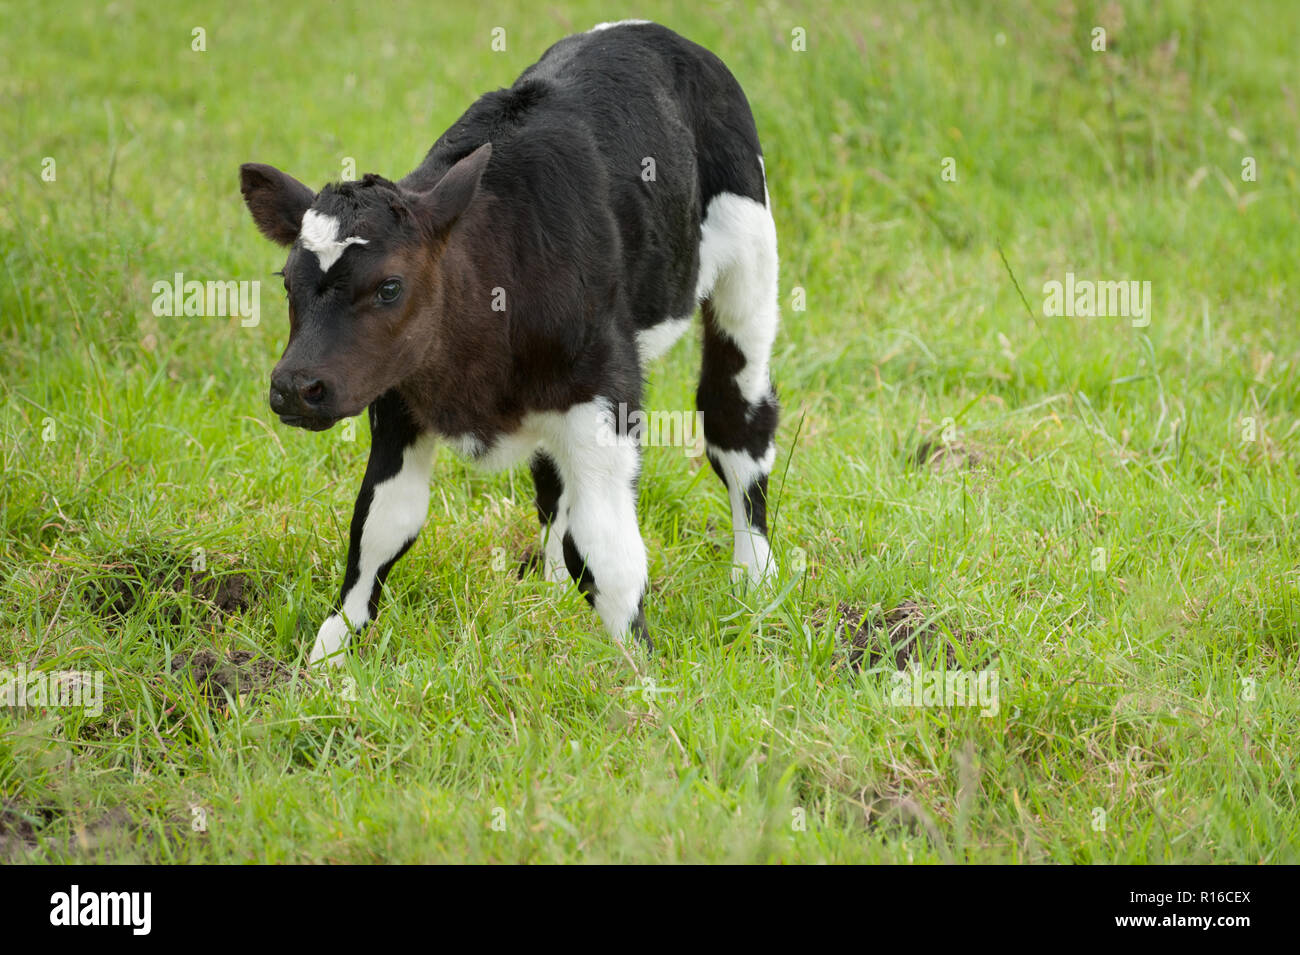 Cute new born calf standing up for the first time Stock Photo